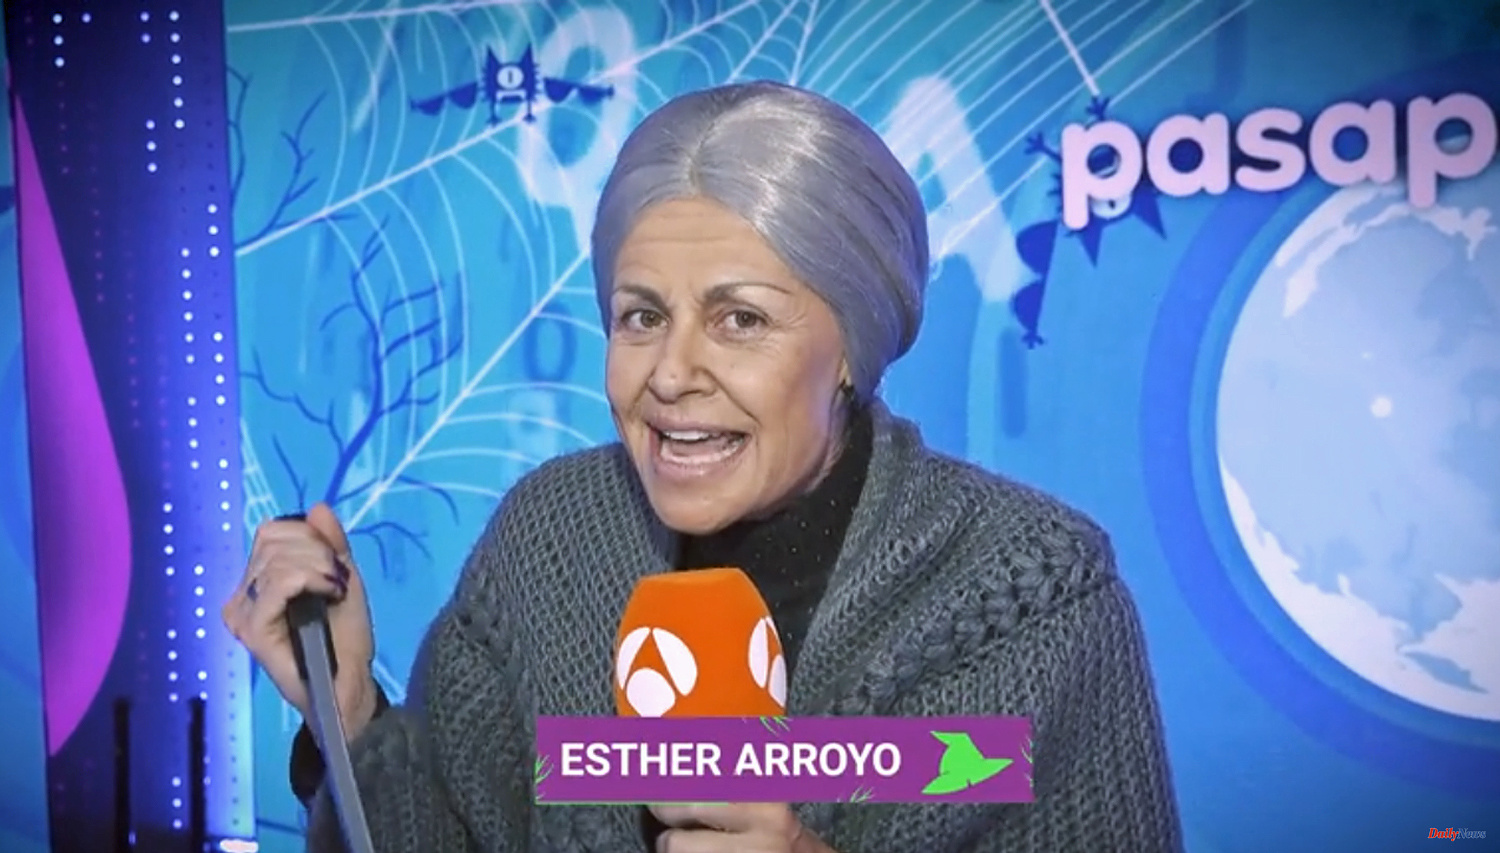 Television Who is Esther Arroyo, the new guest of Pasapalabra